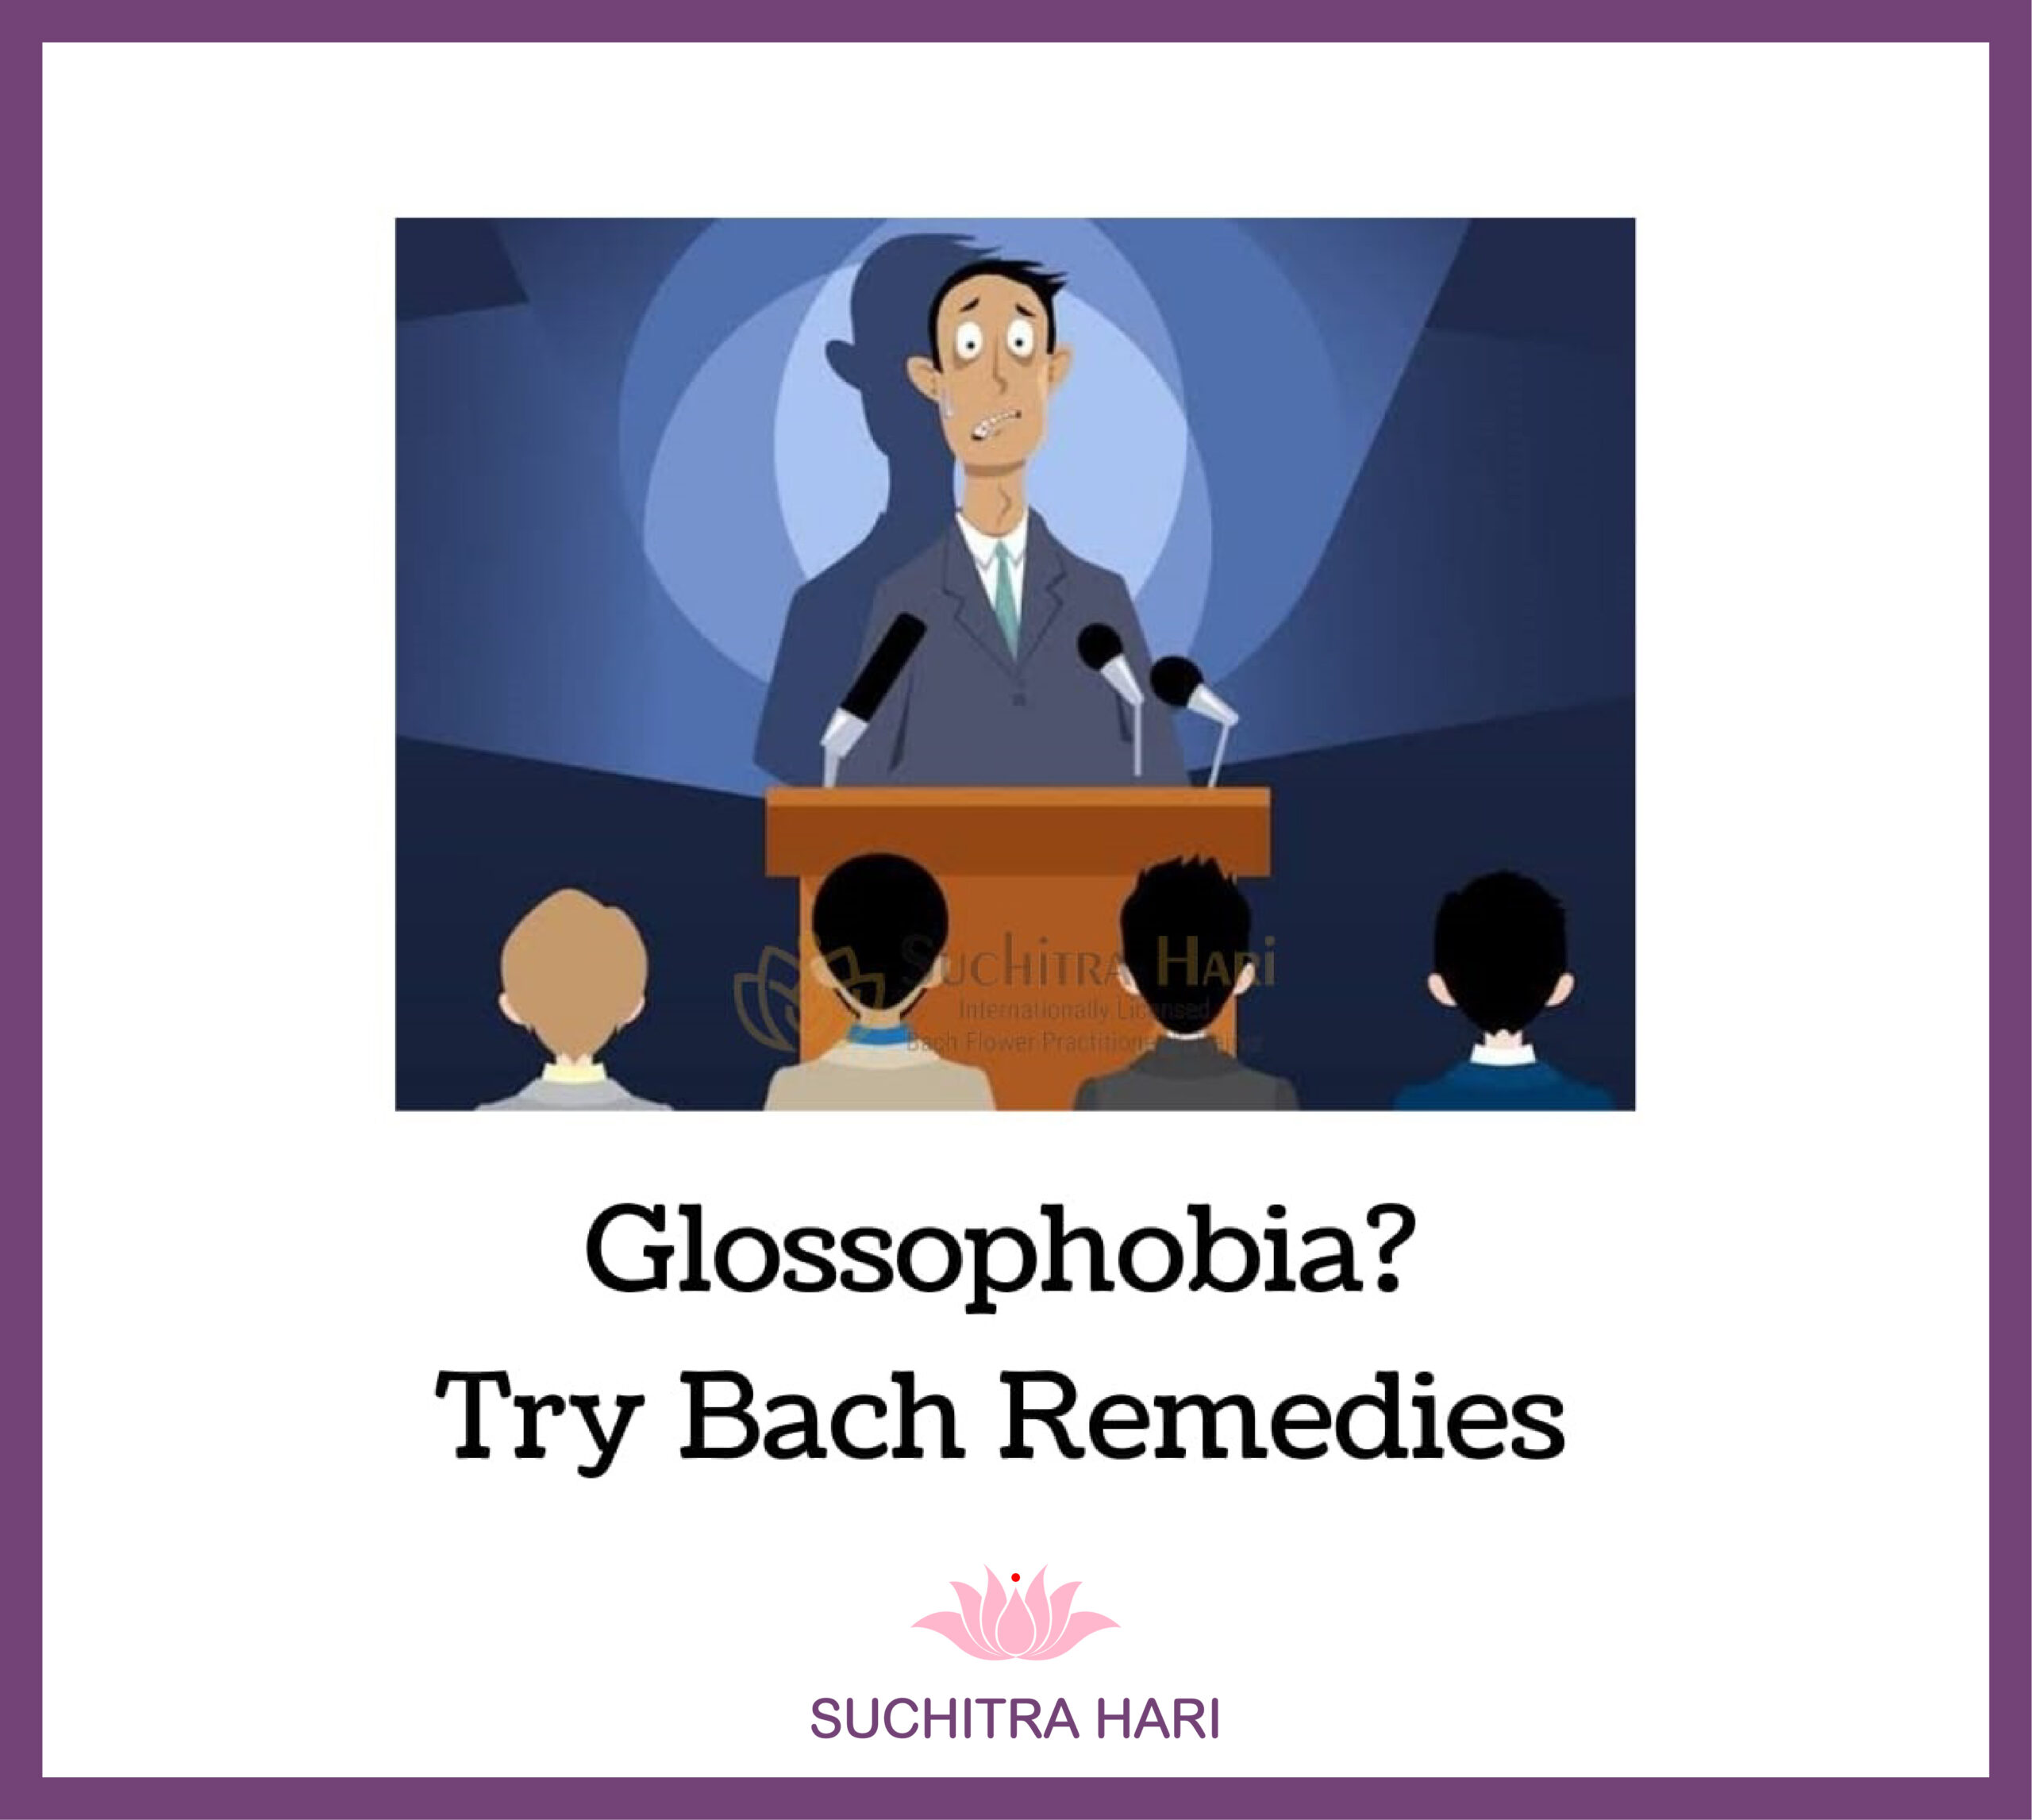 Glossophobia? Try Bach Remedies.